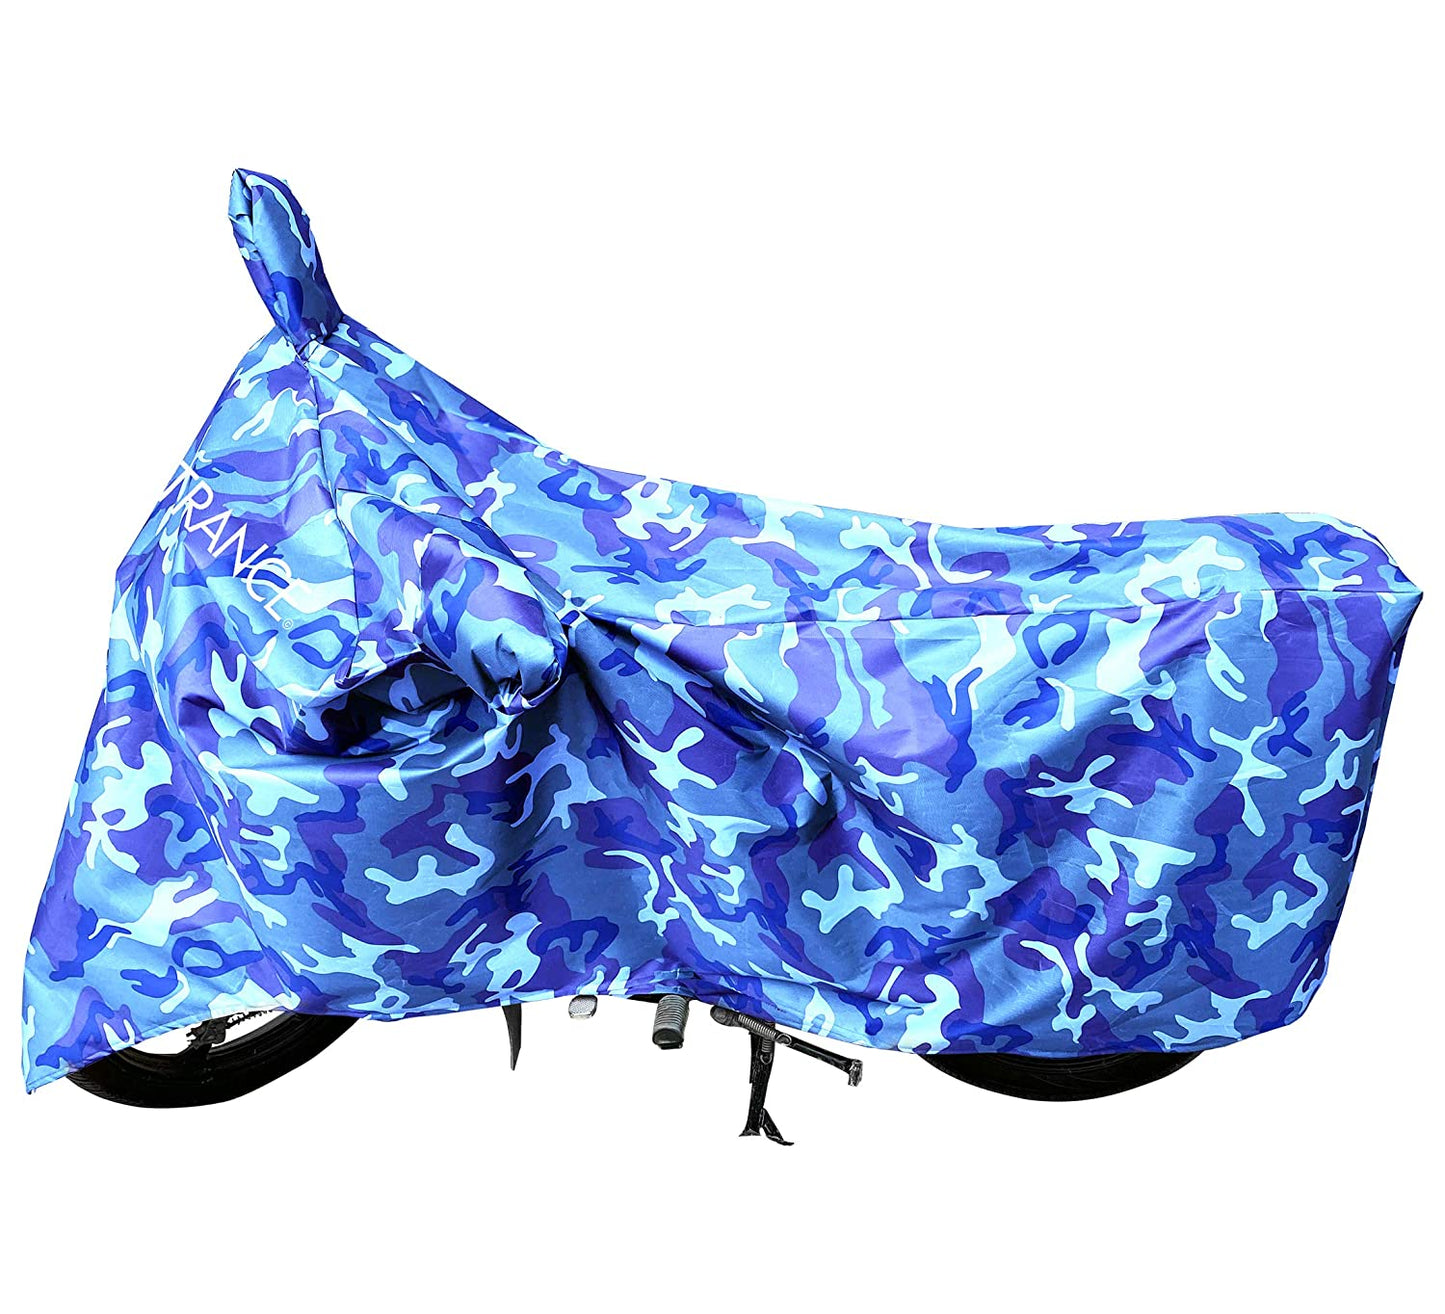 MotoTrance Jungle Bike Body Covers For VespaÂ  Urban Club 2019 - Interlock-Stitched Waterproof and Heat Resistant with Mirror Pockets